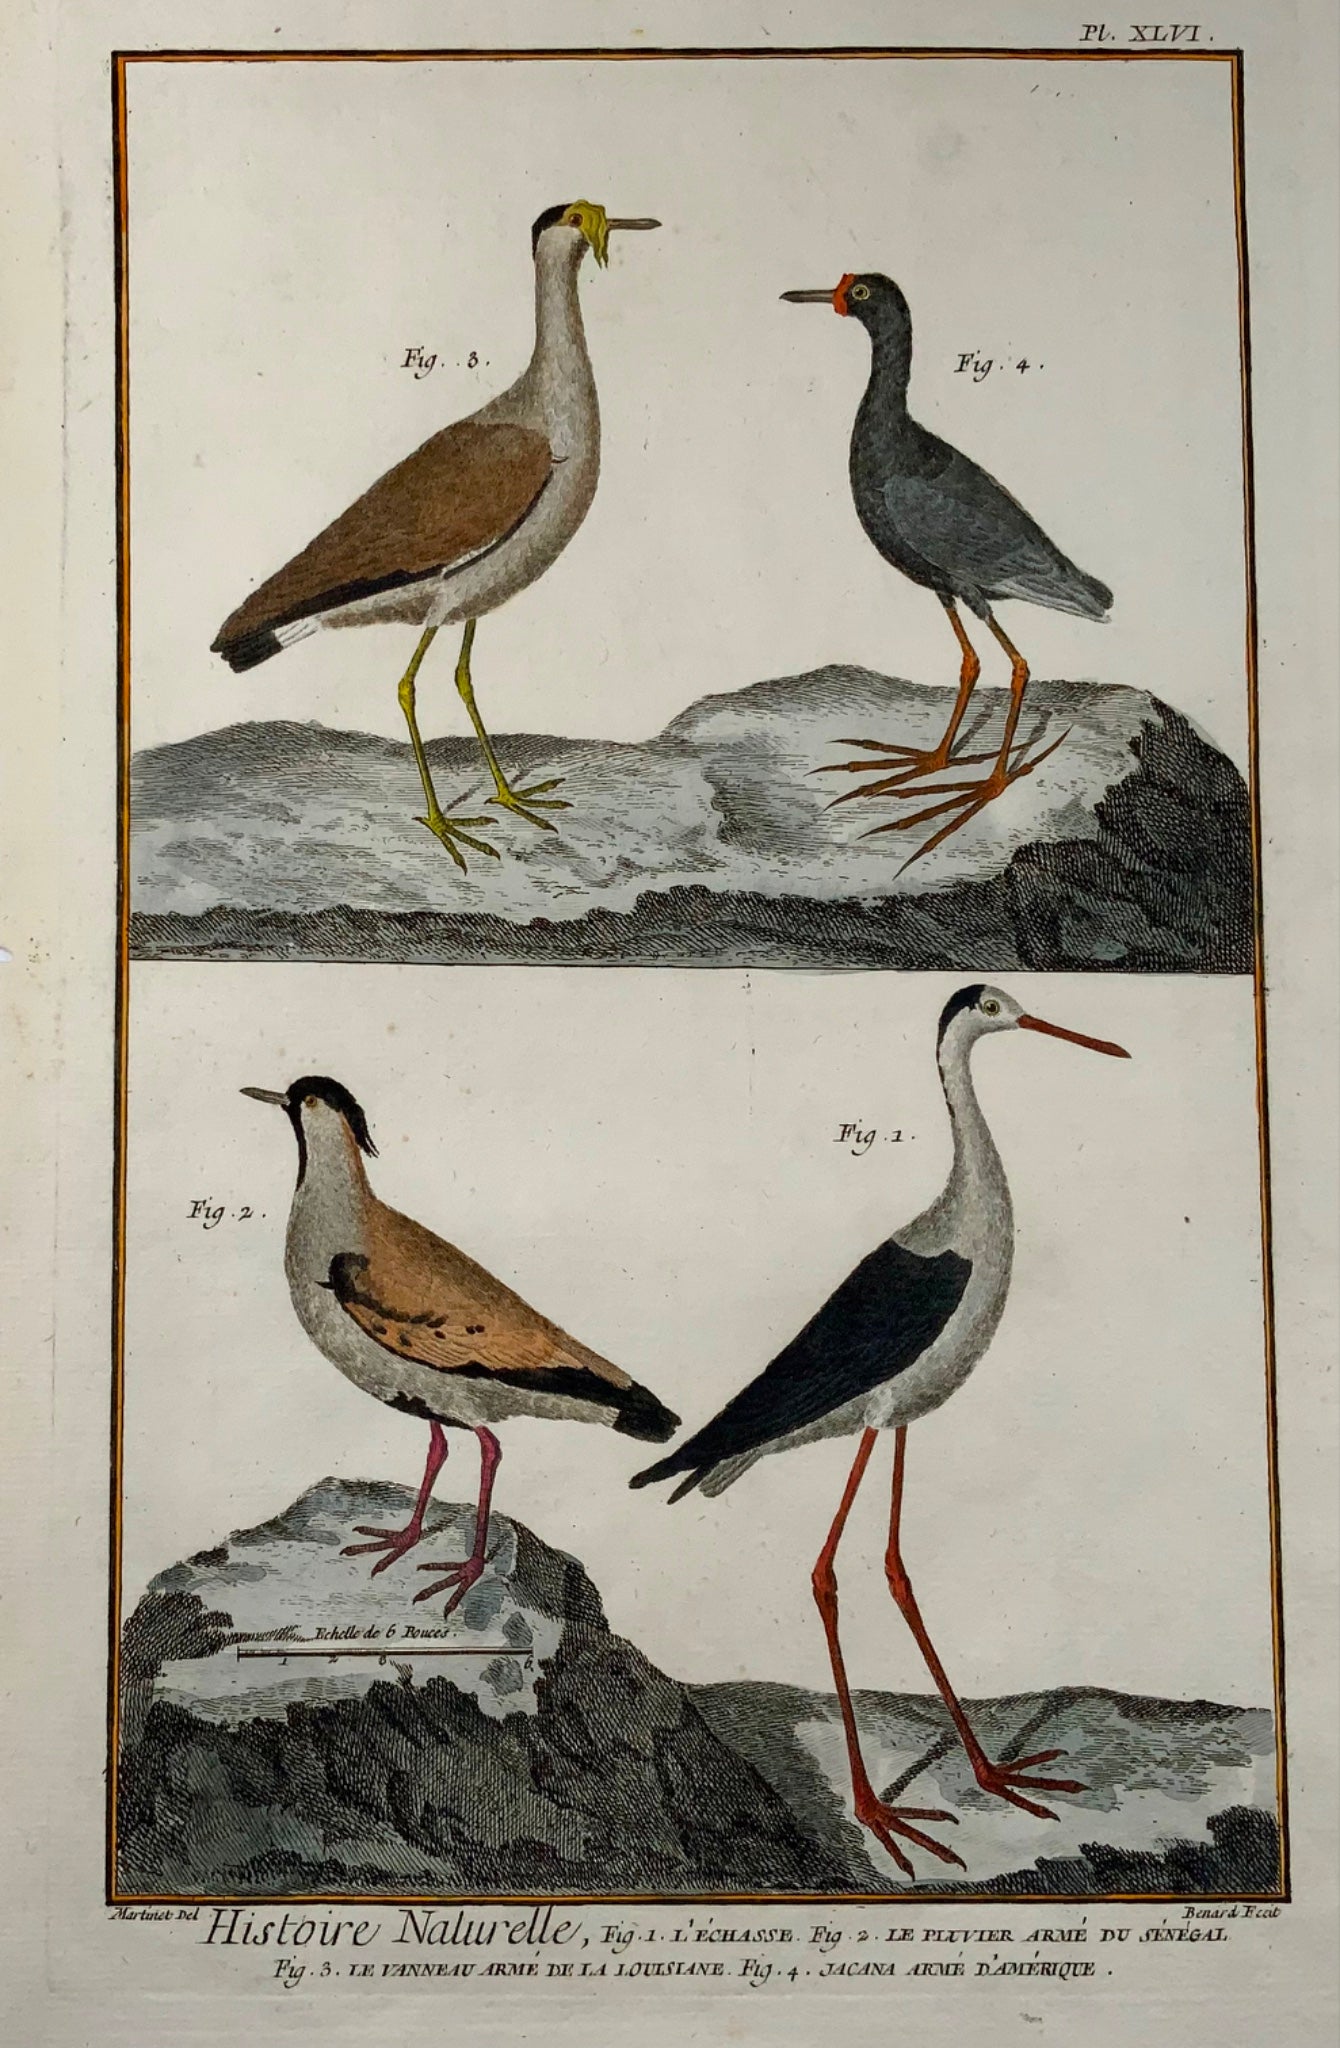 1751 Lawing, Jacana, Pluvier, ornithologie, Martinet, grand in-folio, couleur main